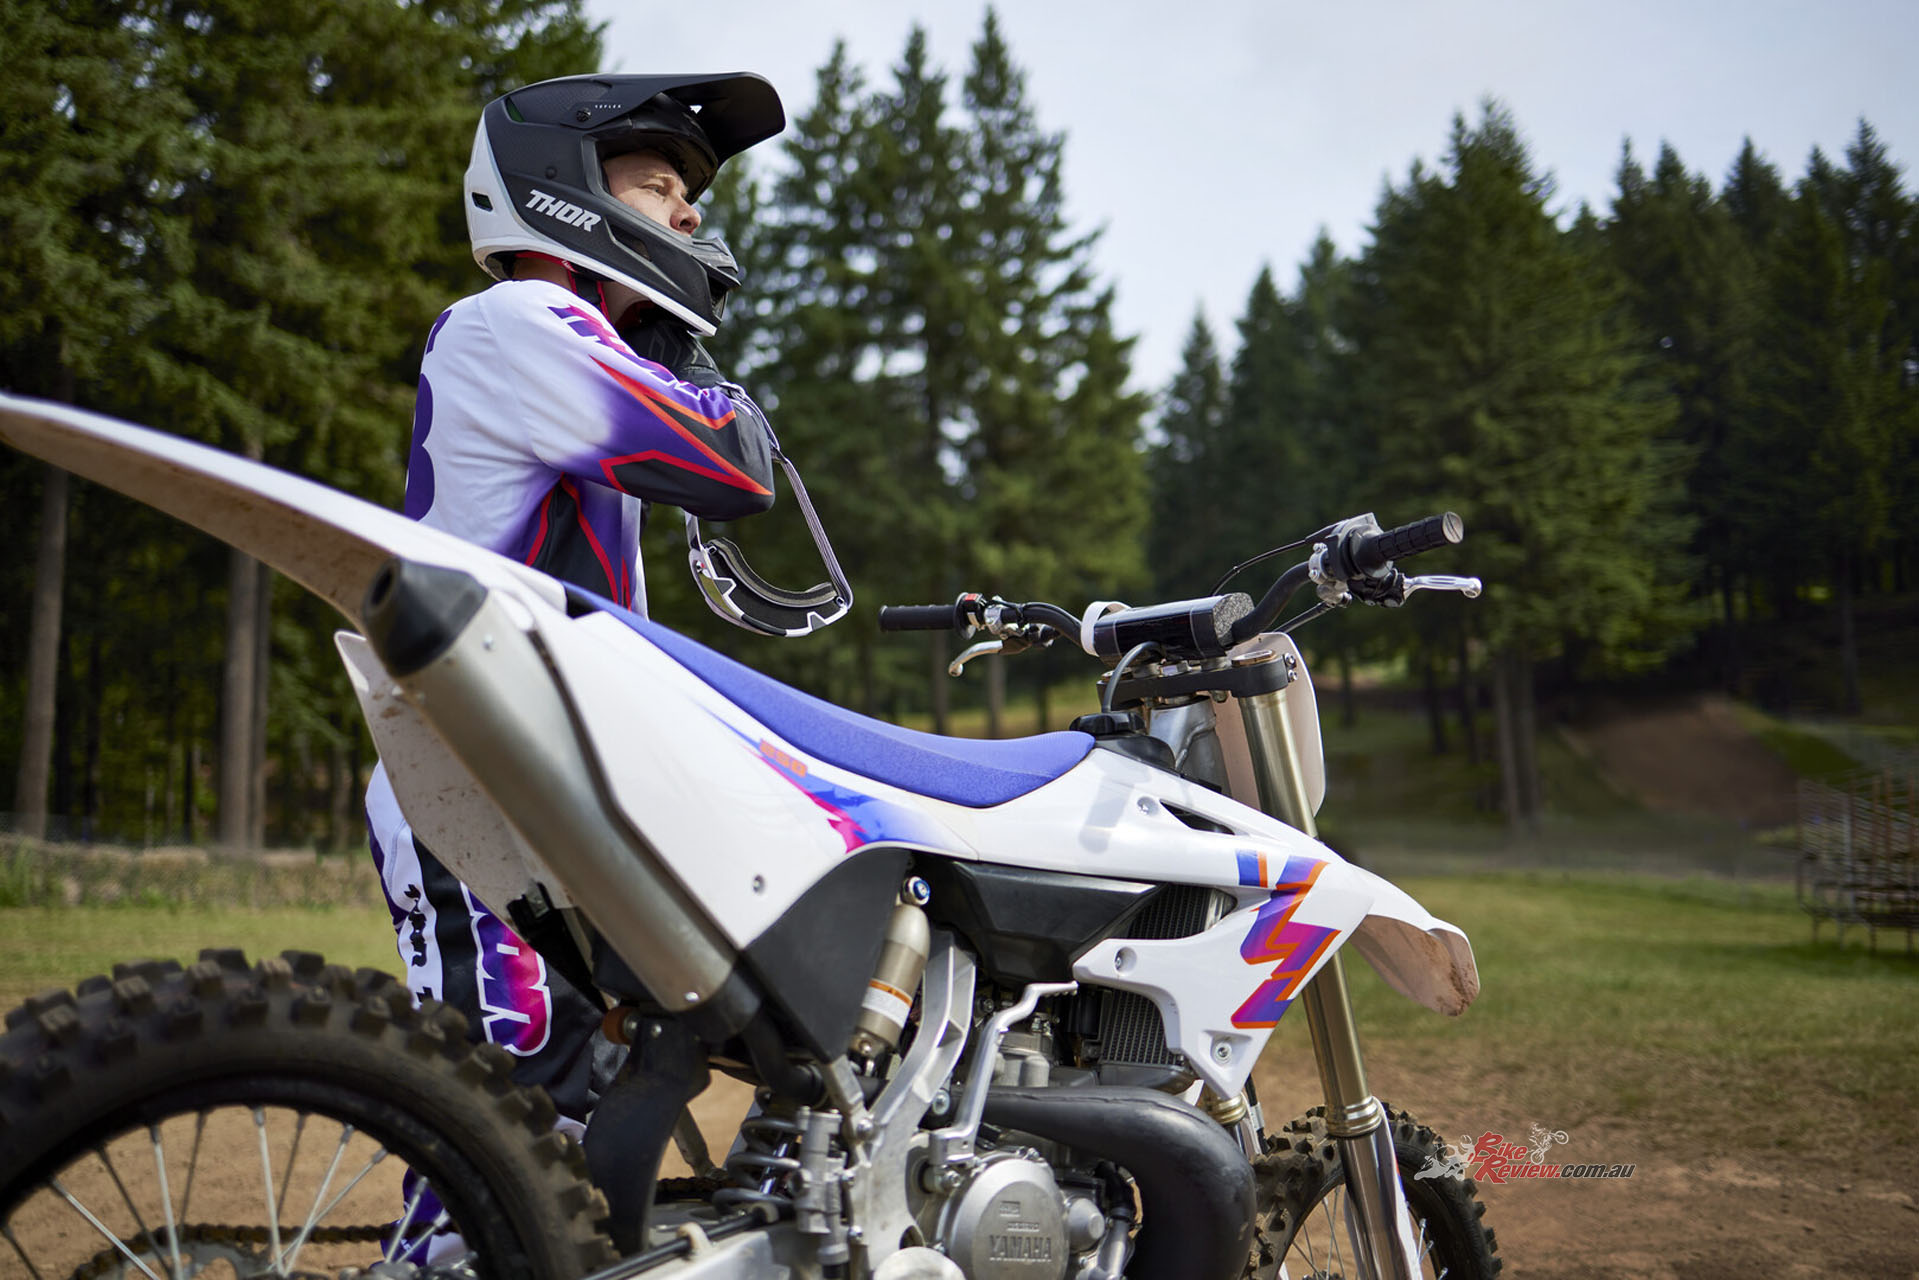 The 2024 YZ250 retains the fast and fun liquid-cooled YPVS-equipped 249cc twostroke powerplant, the compact chassis, highly developed lightweight aluminium frame, and the intuitive handling character and usability.